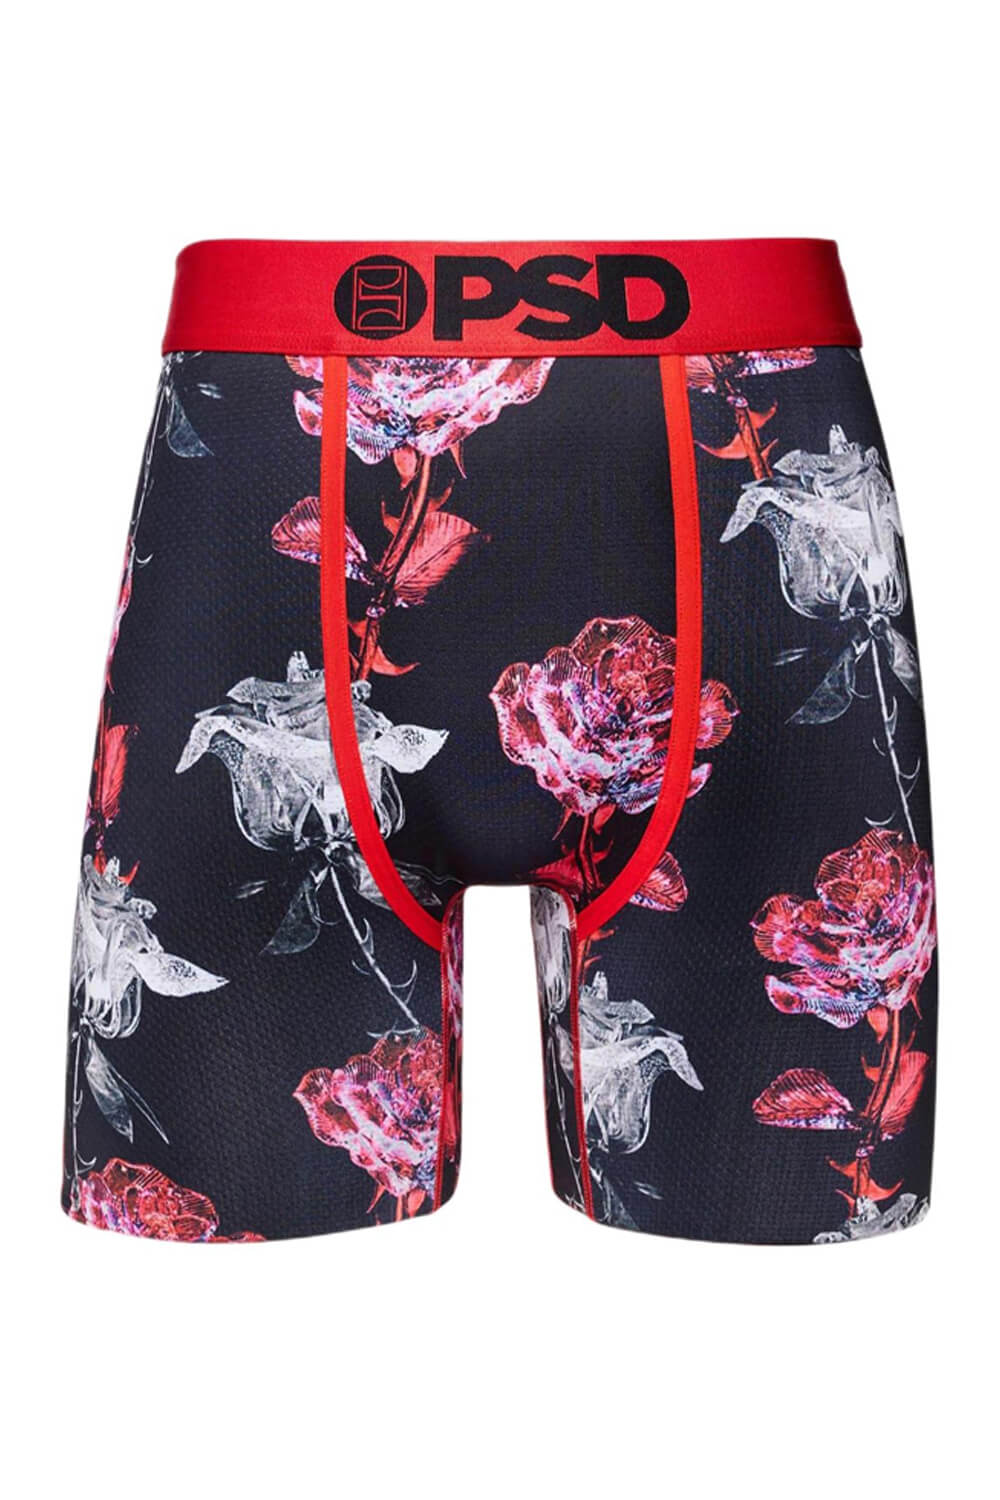 PSD Underwear for Men Ice Silk Quick-Drying Printed Boxers